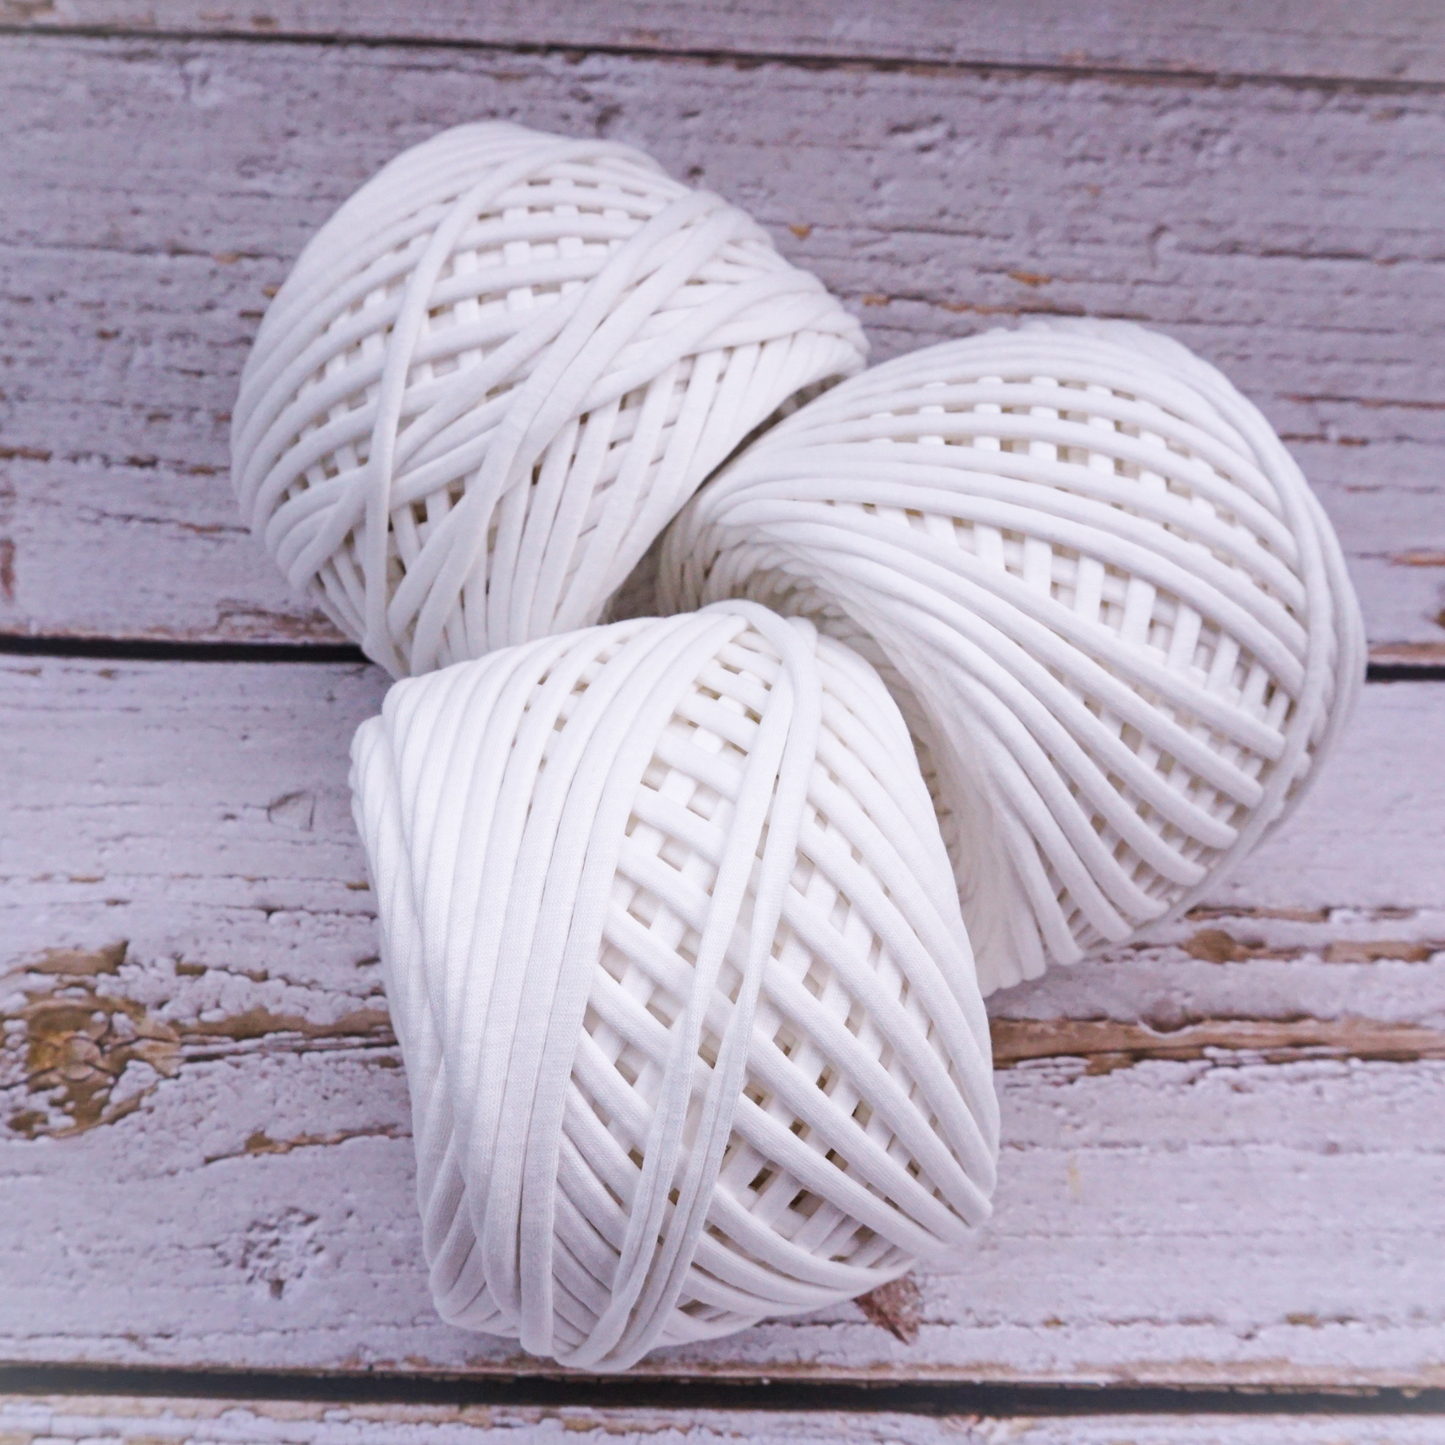 T-shirt yarn for crocheting baskets, bags, rugs and home decor. White